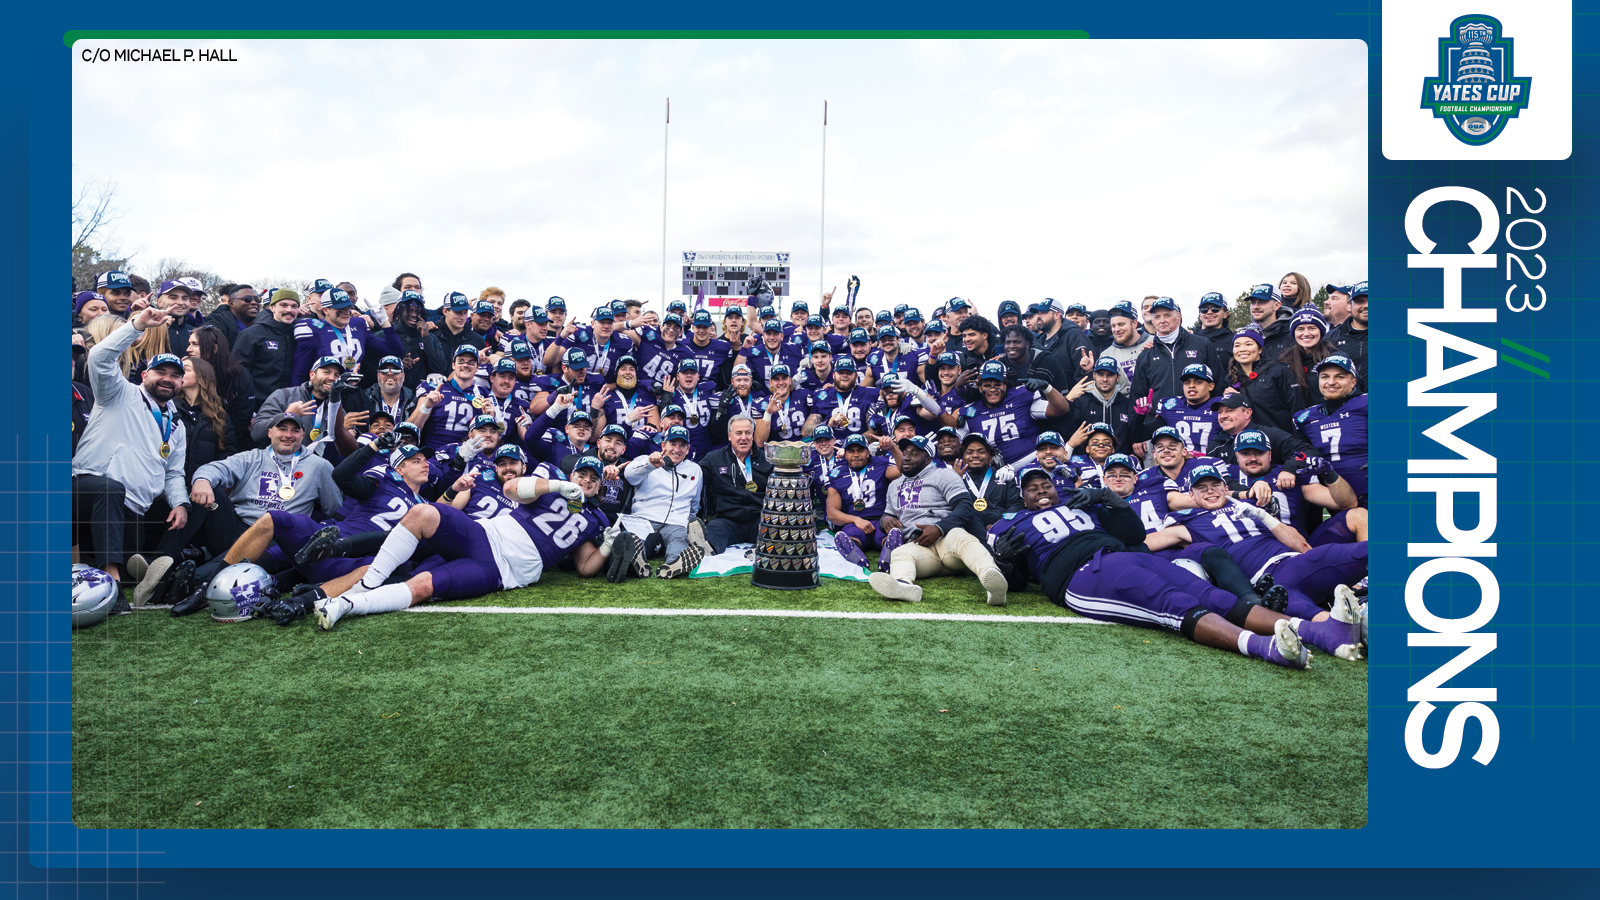 Predominantly blue graphic covered mostly by 2023 OUA Football Championship banner photo, with the corresponding championship logo and white text reading '2023 Champions' on the right side